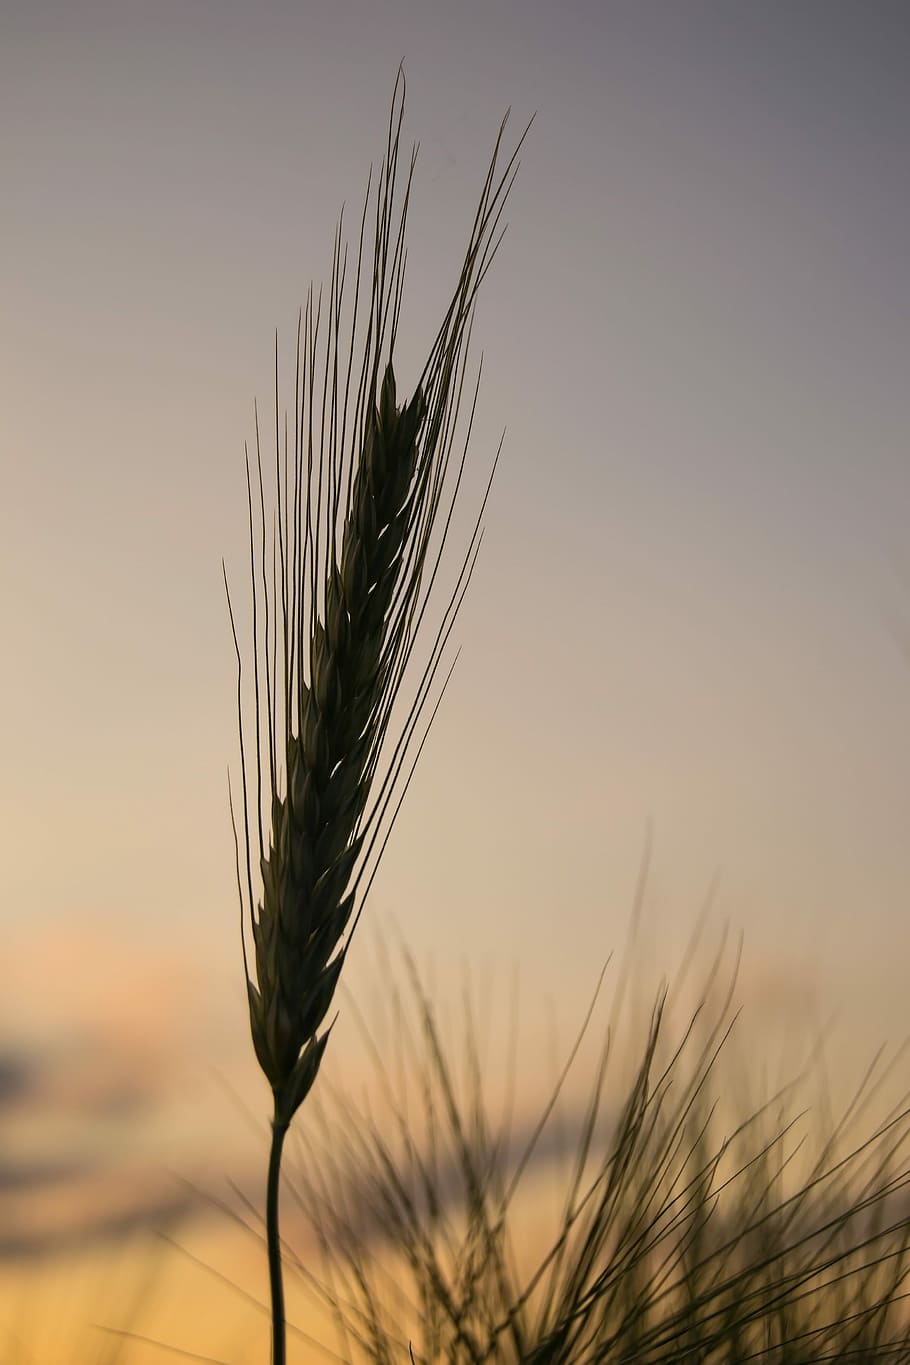 Cereals, Grain, Wheat, Field, Nature, wheat, field, spike, plant, food, baked goods